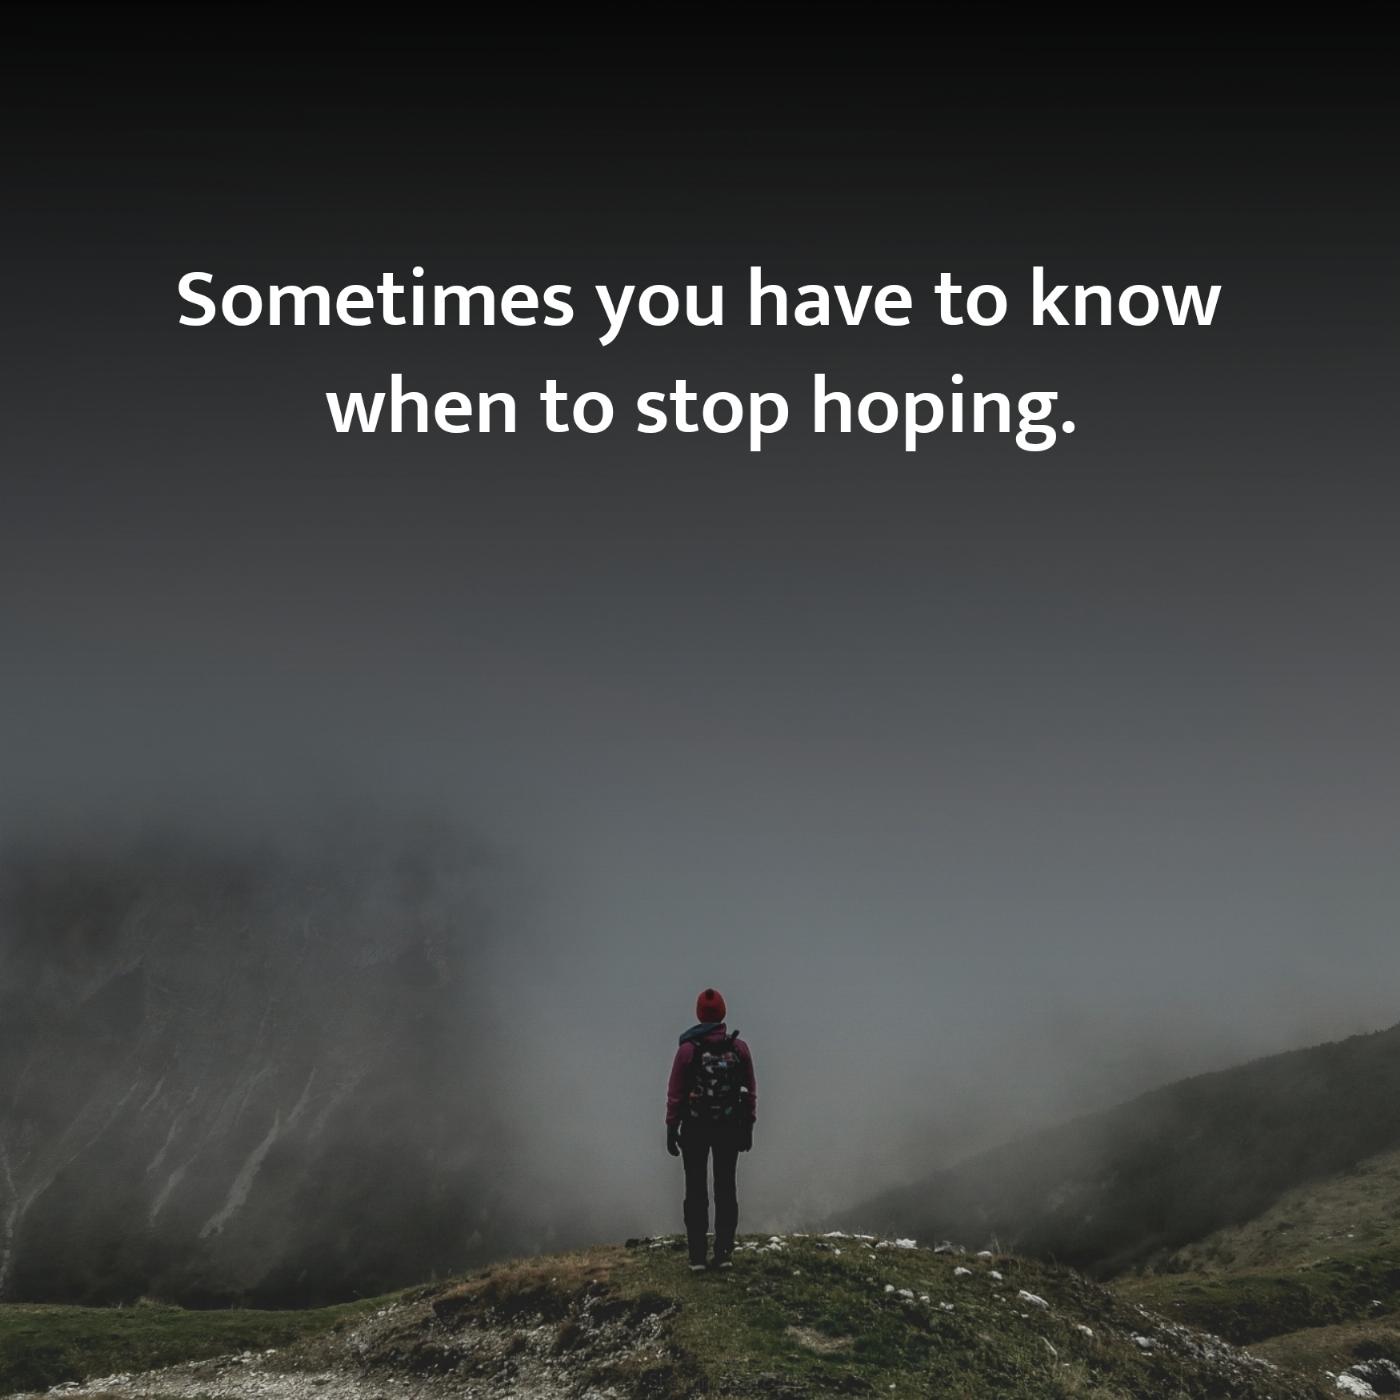 Sometimes you have to know when to stop hoping